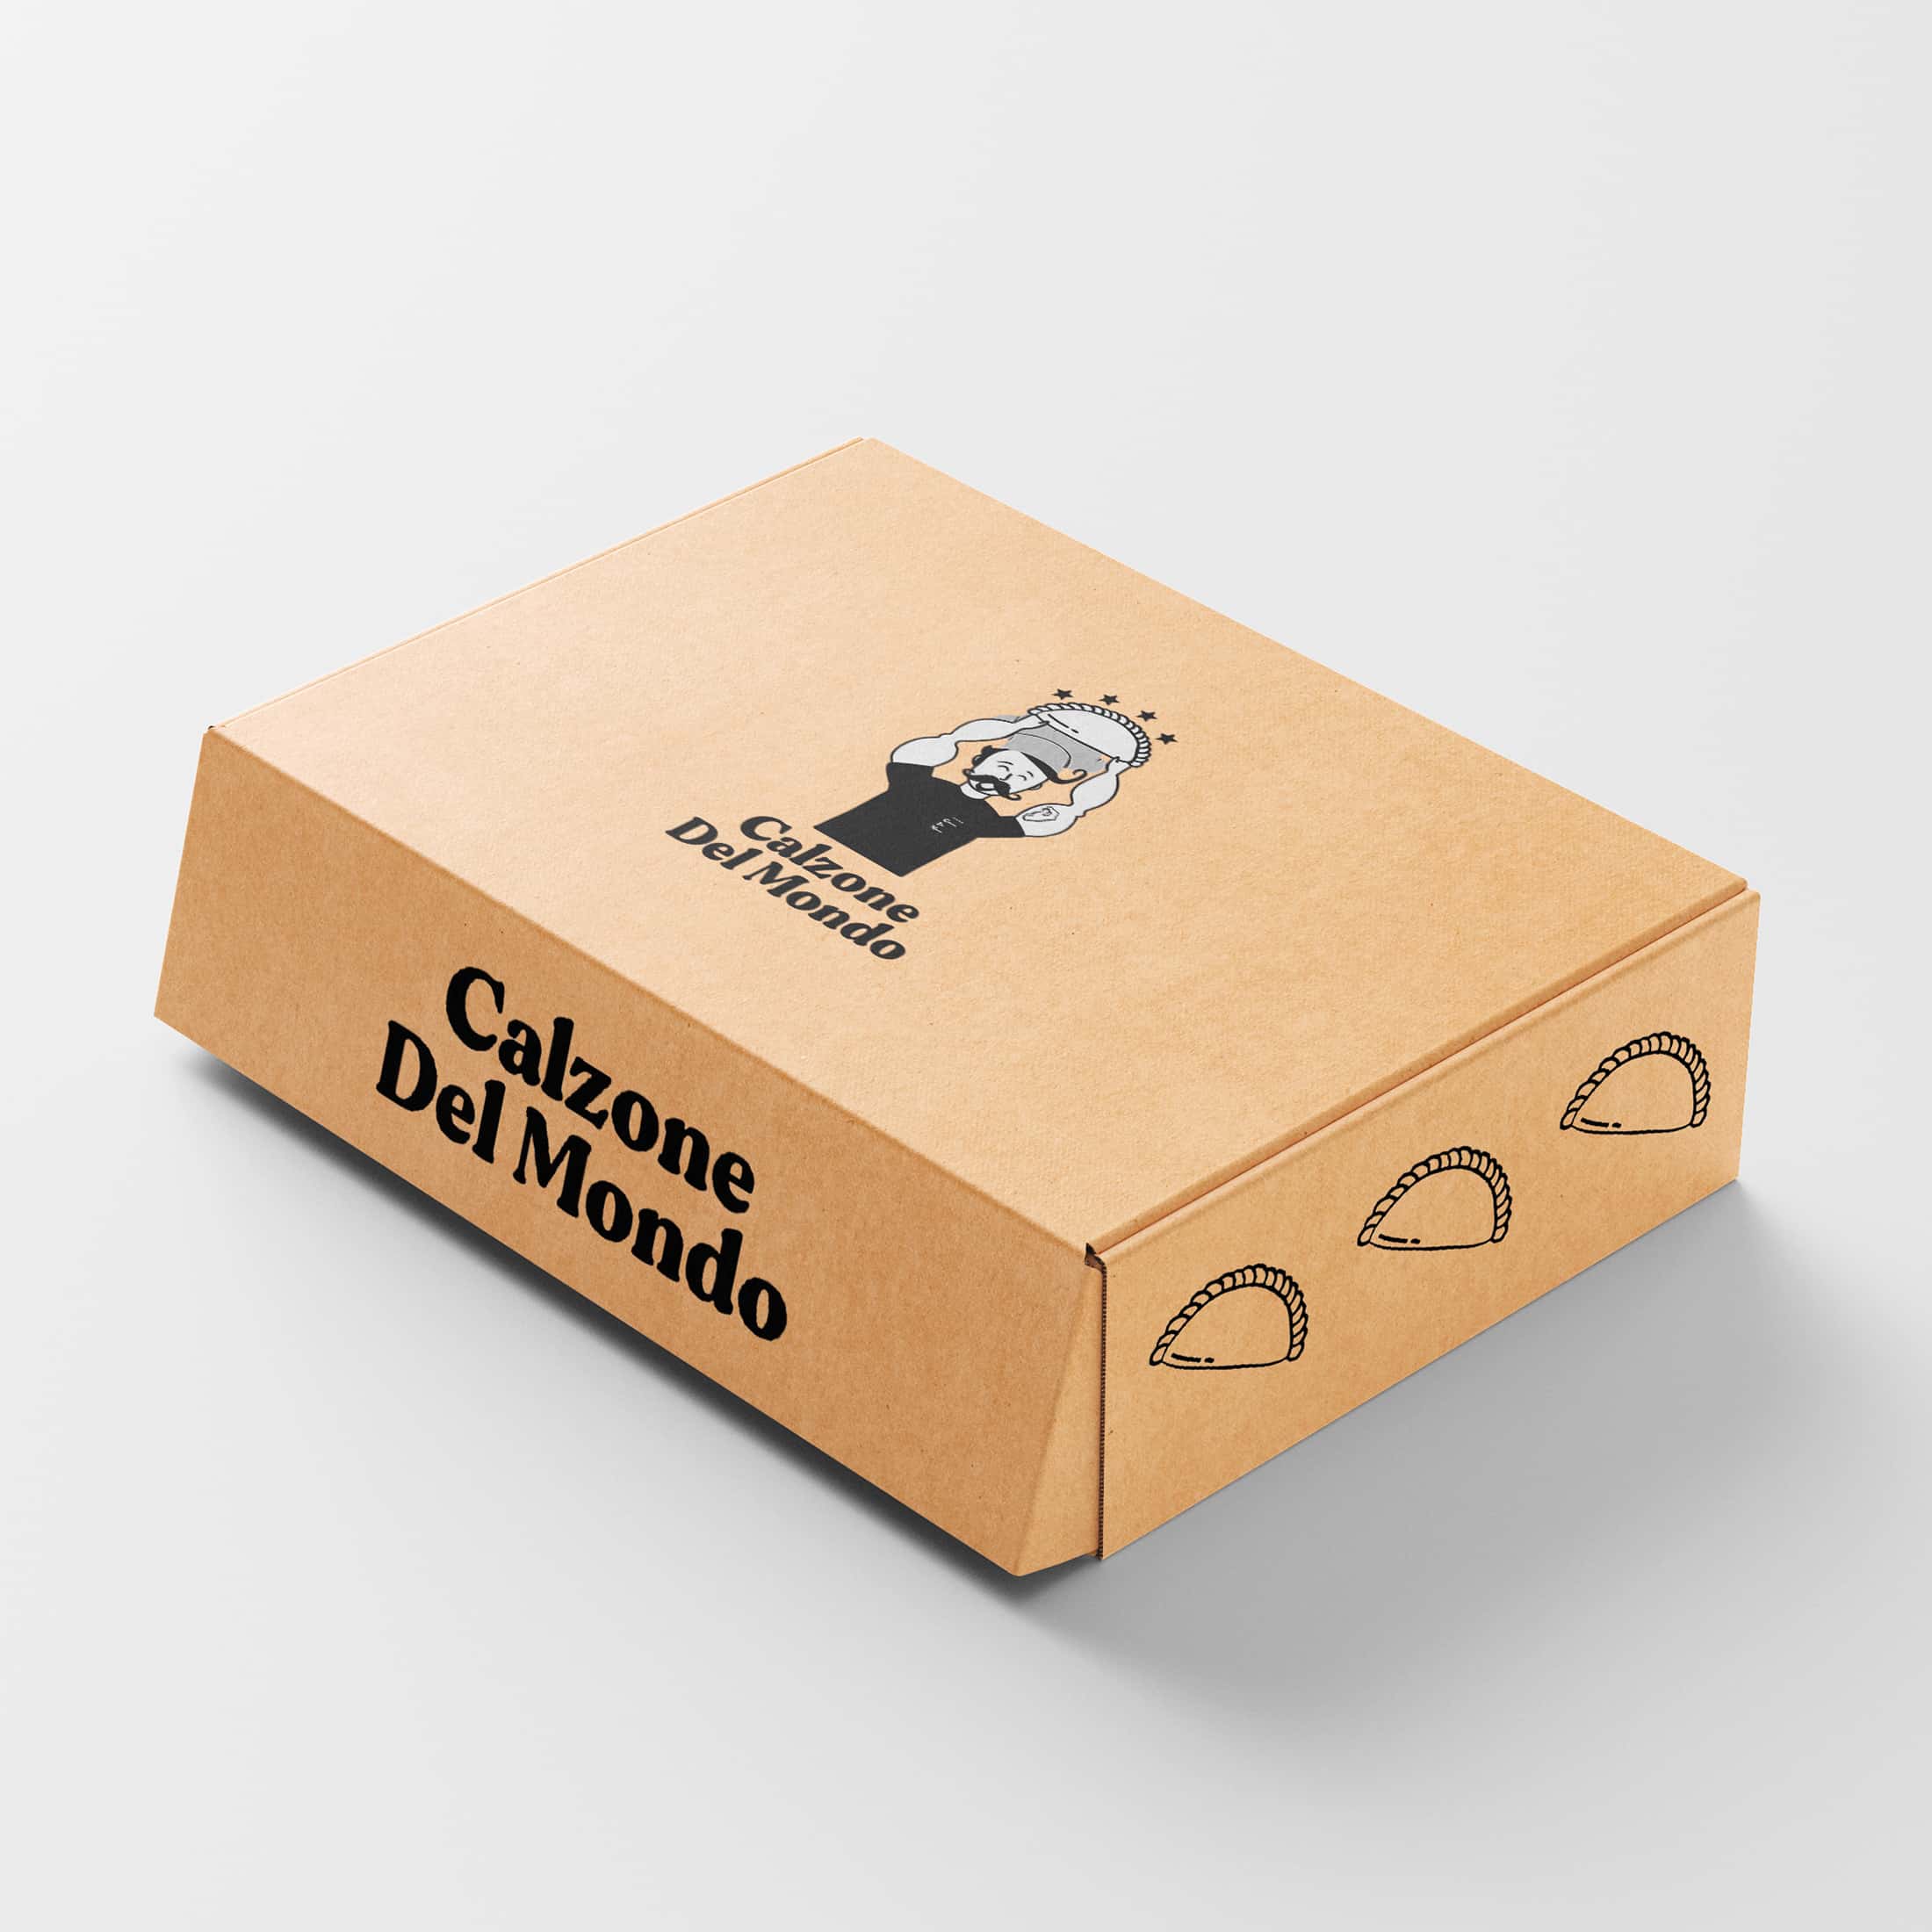 Support print - packaging fermé - Agence Crapules - Calzone Del Mundo